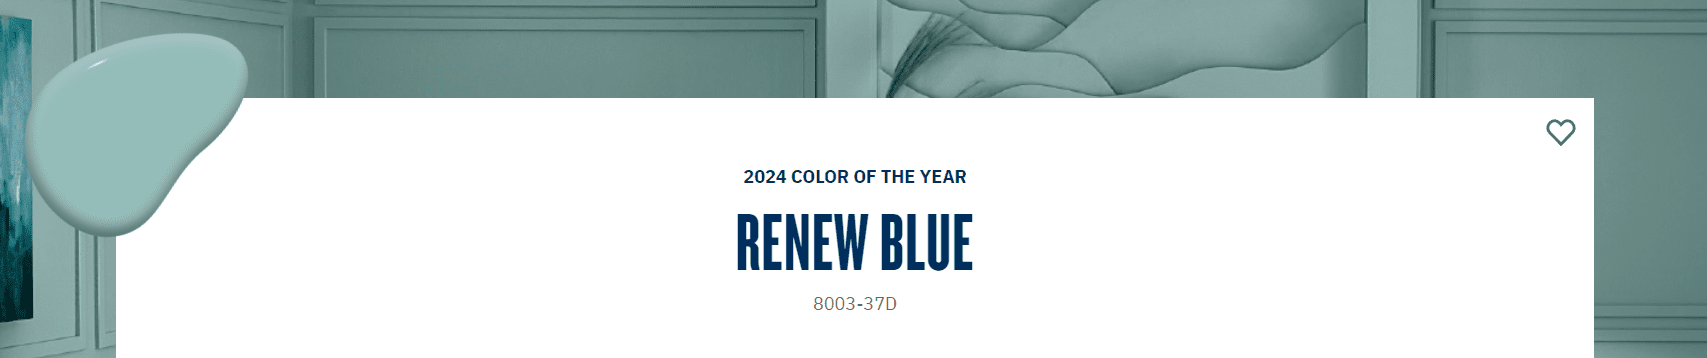 Valspar-Color-of-the-Year-2024-Renew-Blue